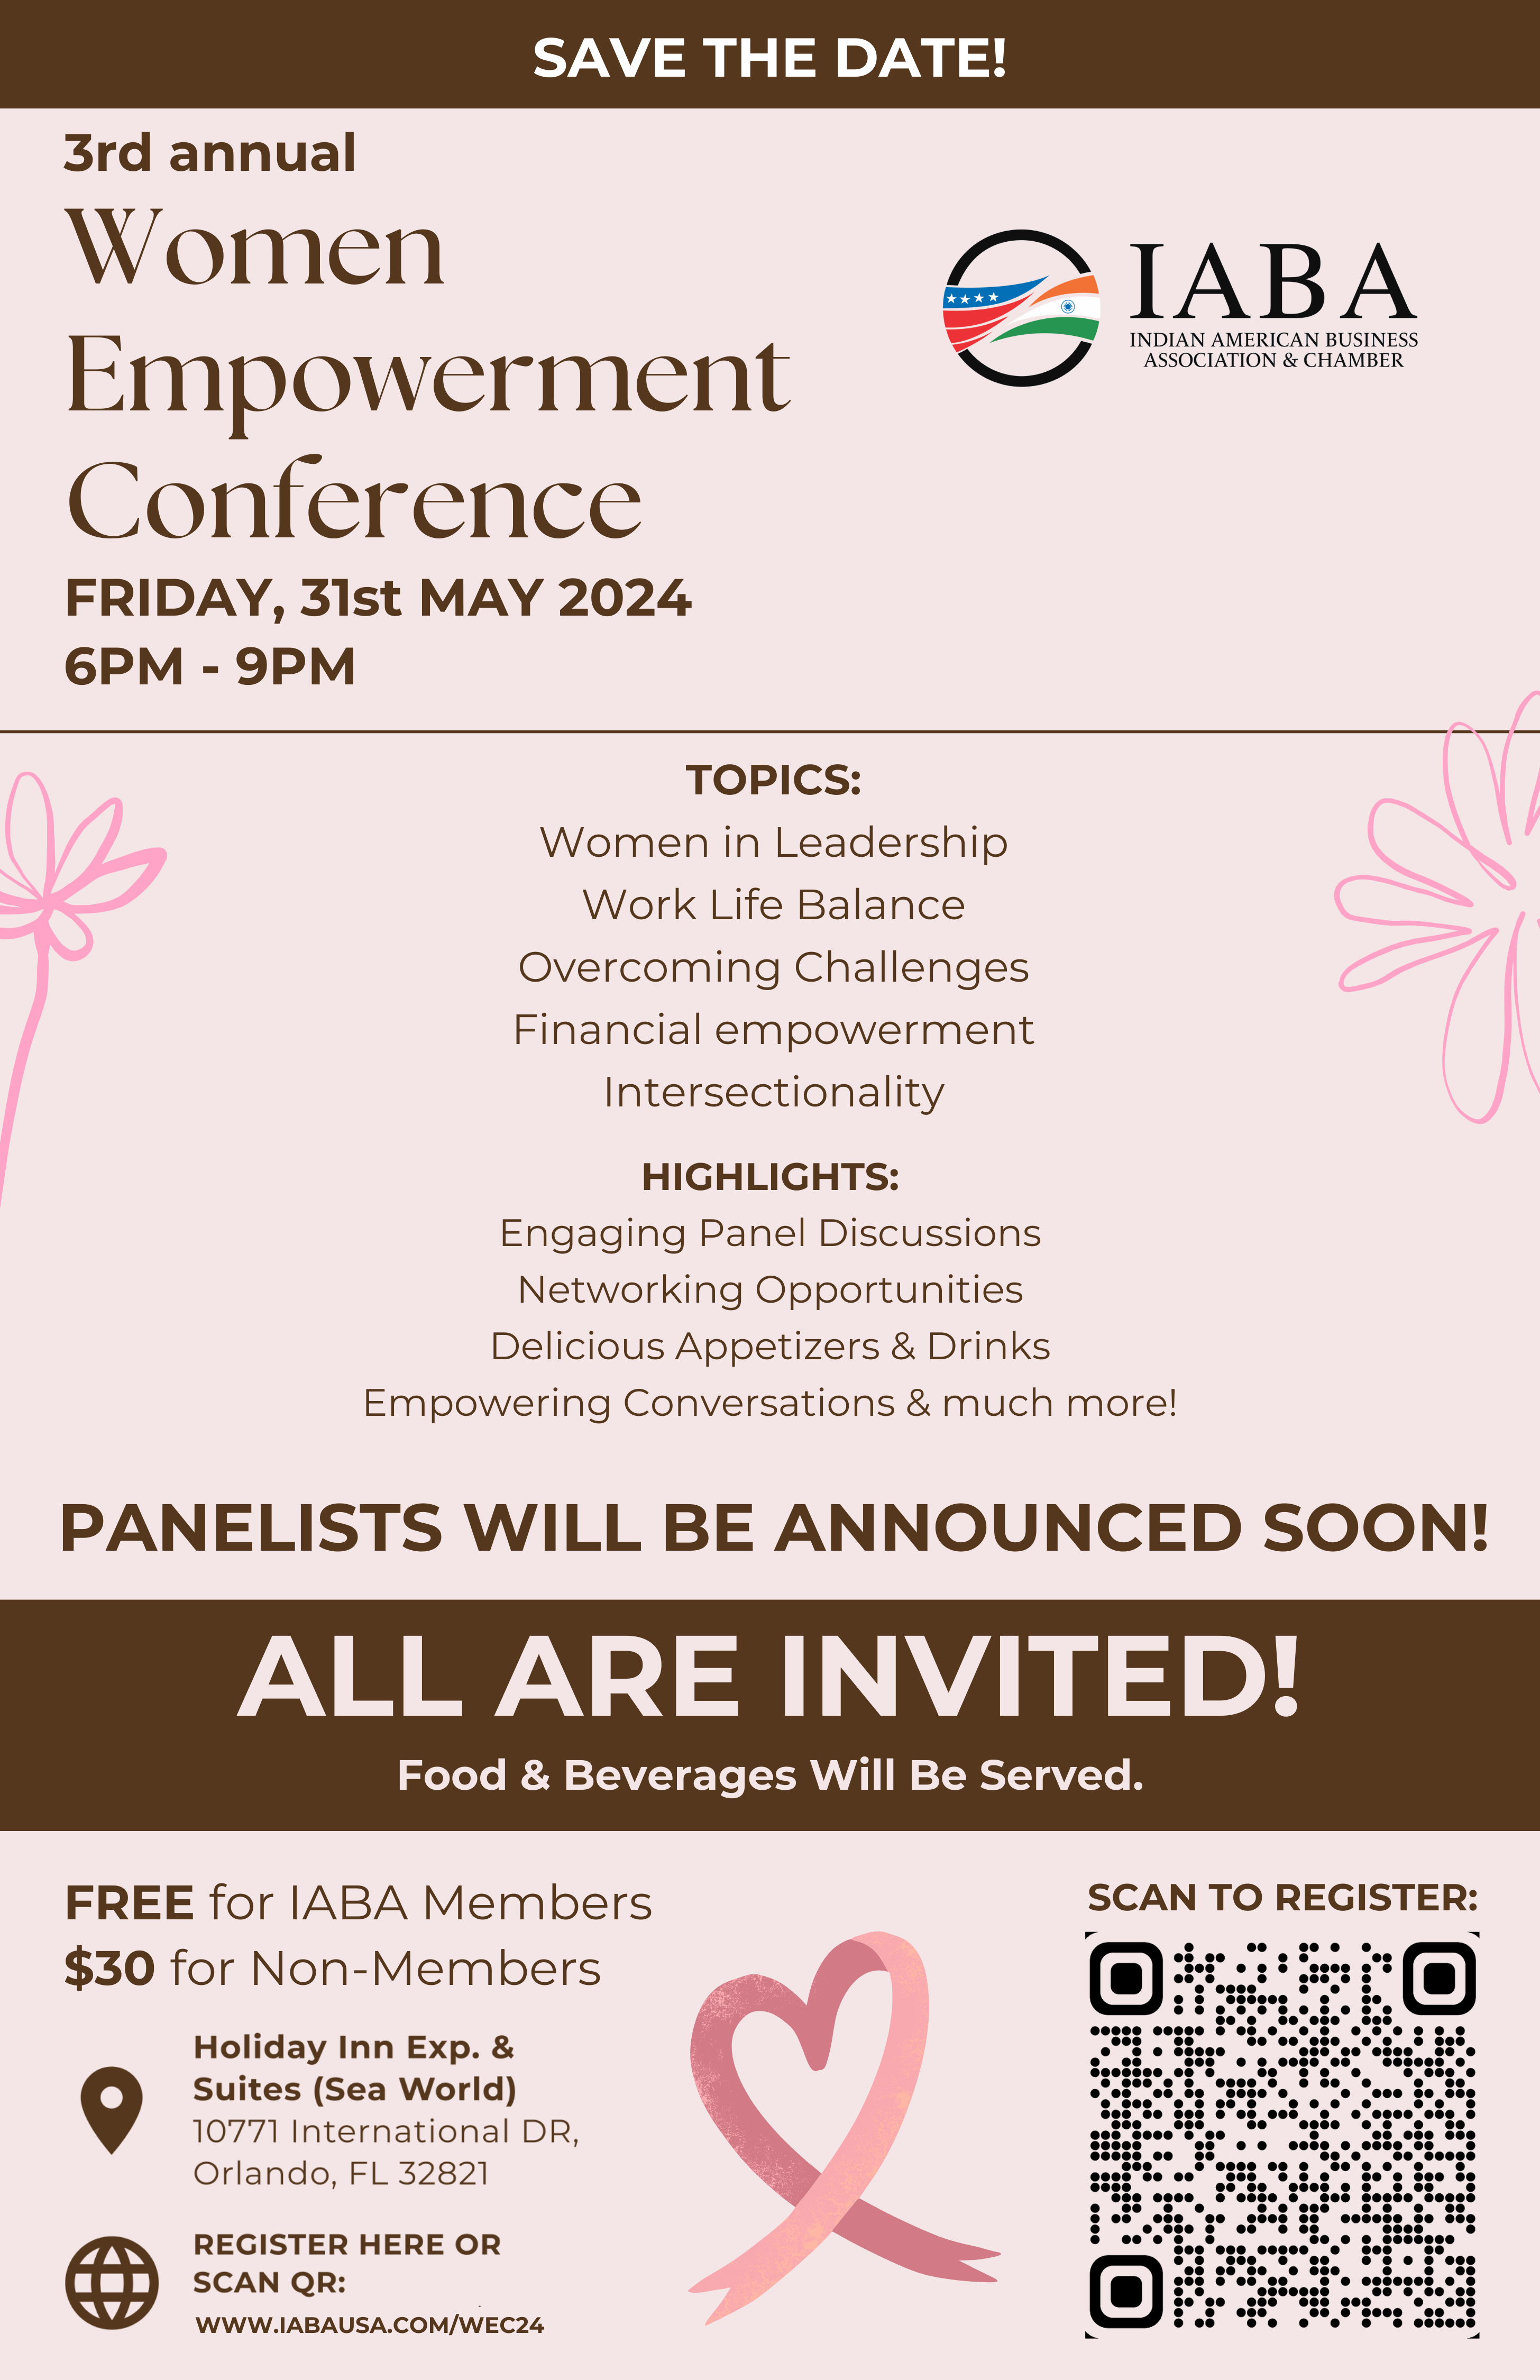 IABA- 2024 Women Empowerment Conference on 31st May, 2024